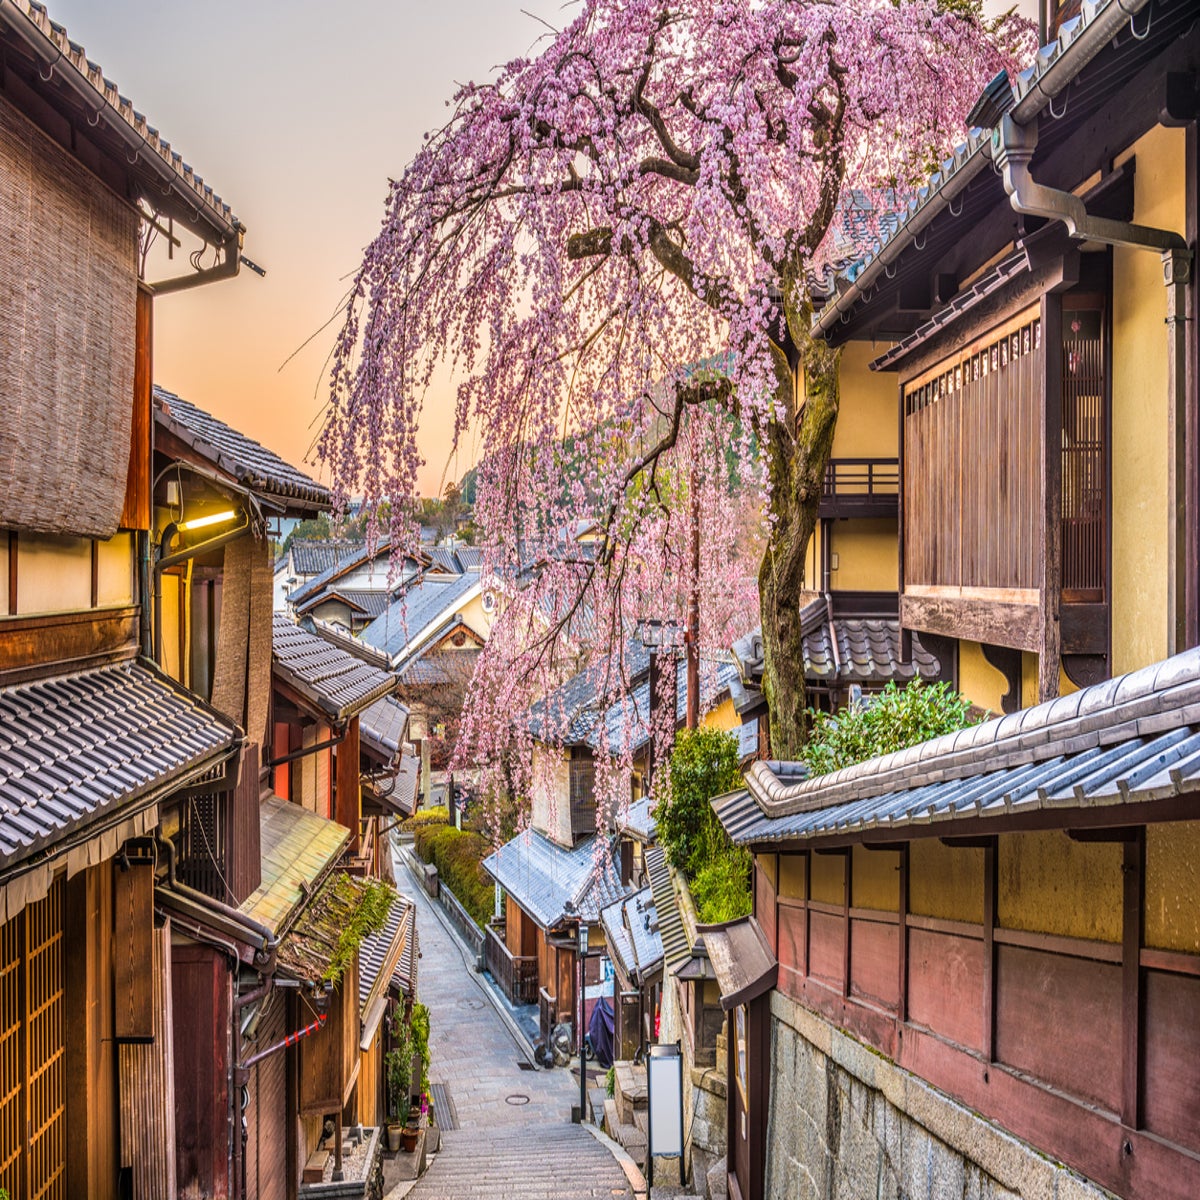 Everything You Need to Know to Enjoy the Cherry Blossom Season in Japan 